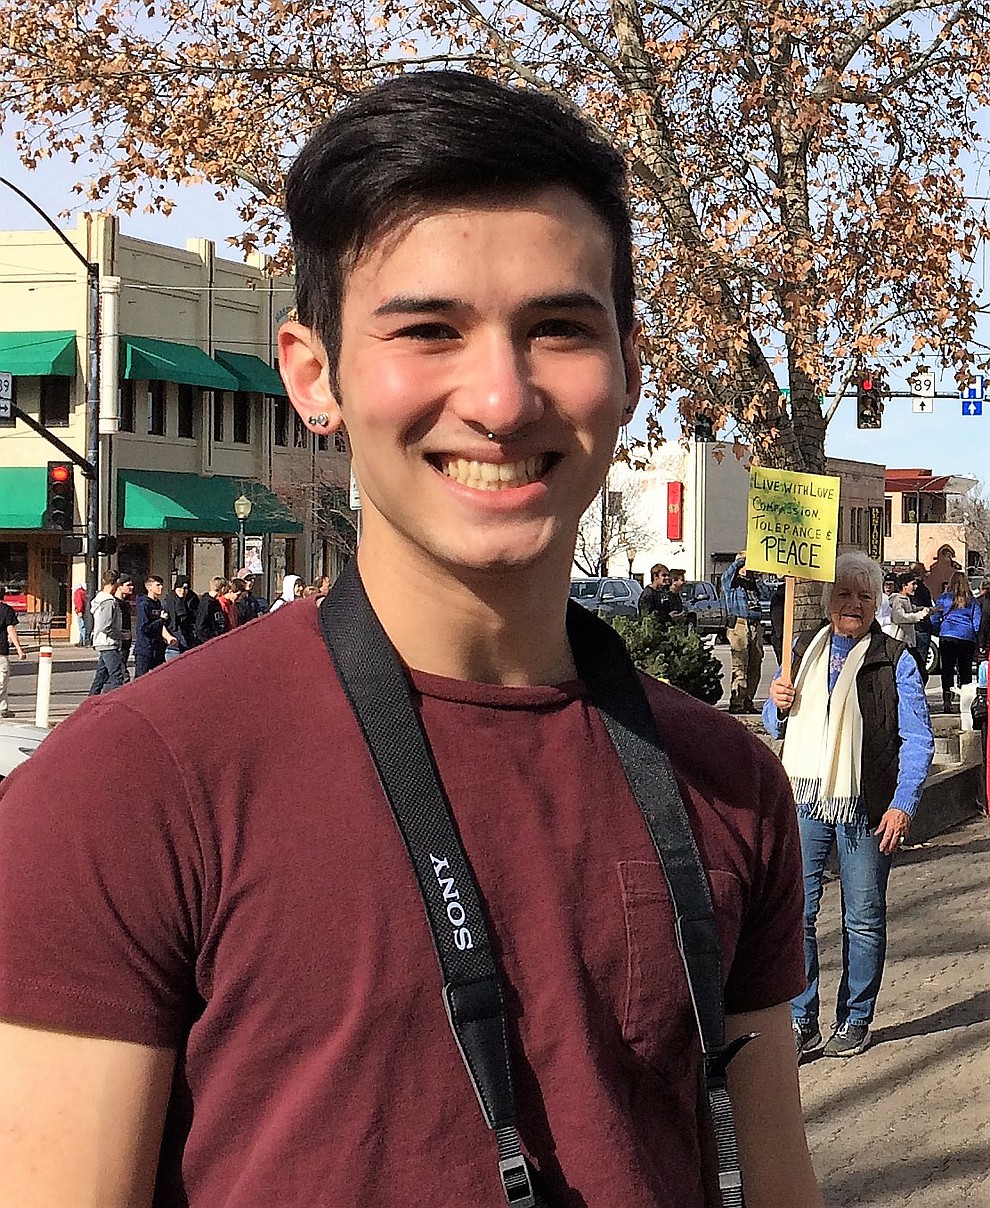 Why are you here today? Jonathan Chin, 21, Prescott. “I stand in solidarity with all the women in my life that supported me, and to be visible. My mom is the most important person to me; she is the hardest worker I know. To not support her, I would be ashamed.” (Sue Tone/Courier)